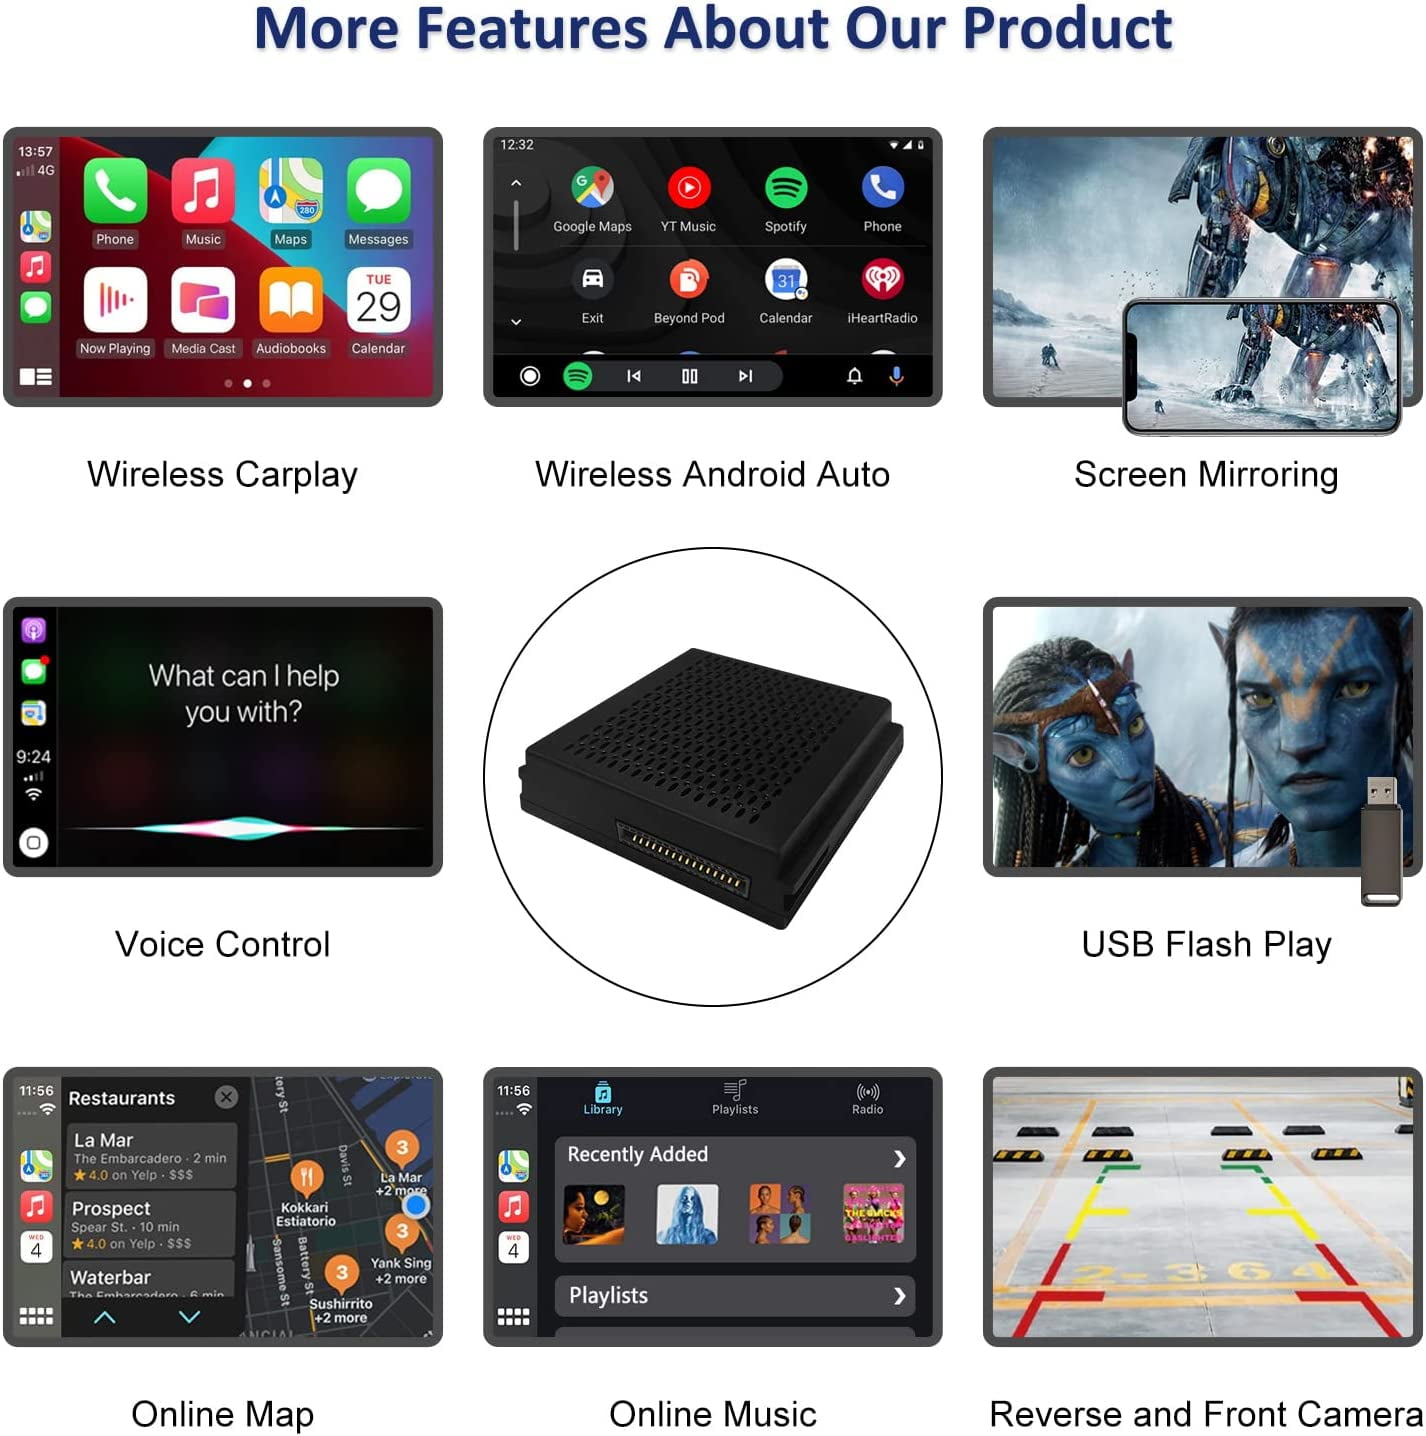 Wireless Apple CarPlay/Android Auto complete review & setup – Road Top